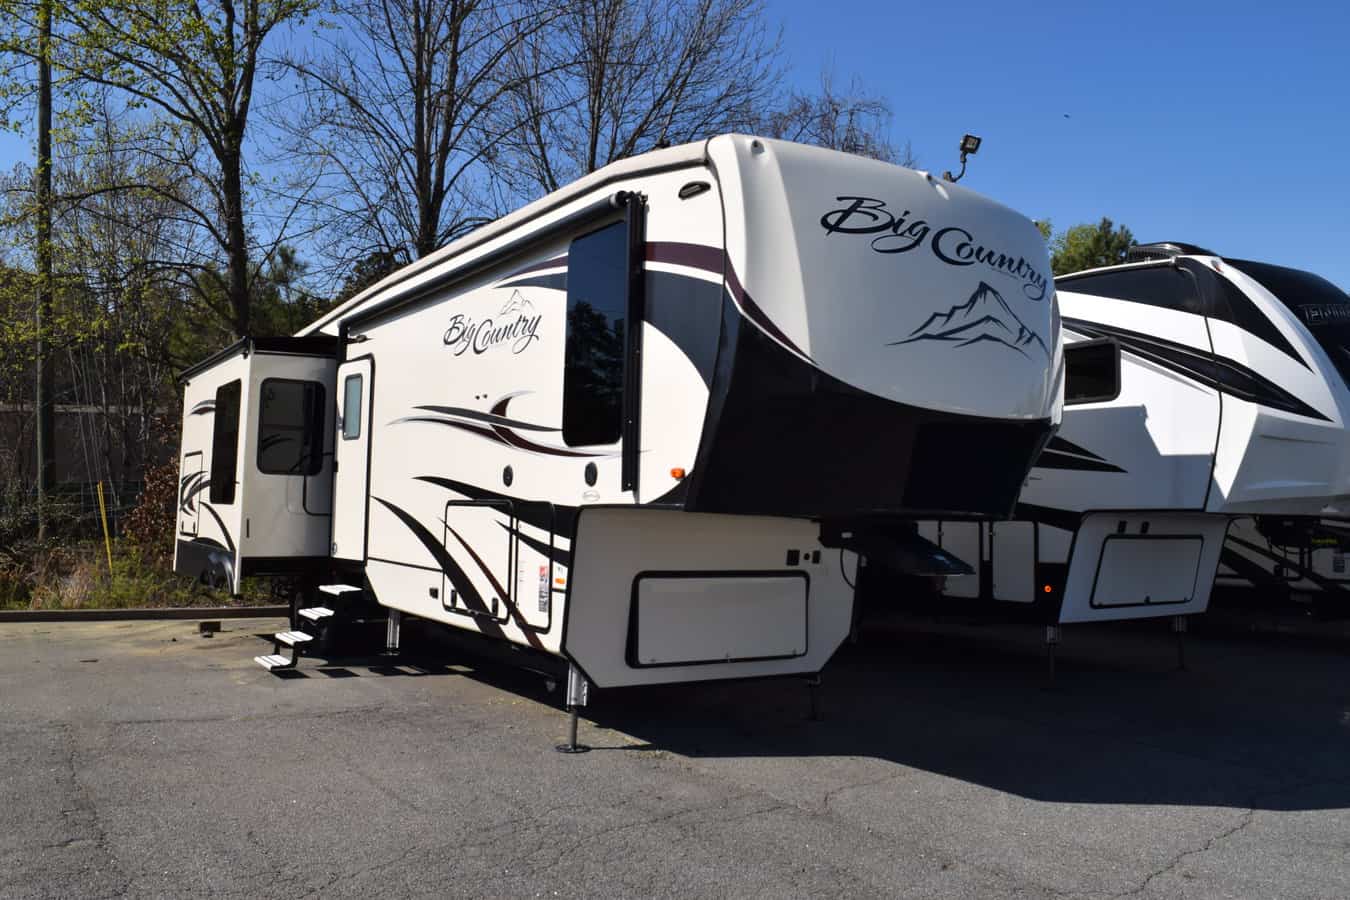 USED 2018 Heartland BIG COUNTRY 3100QSCK